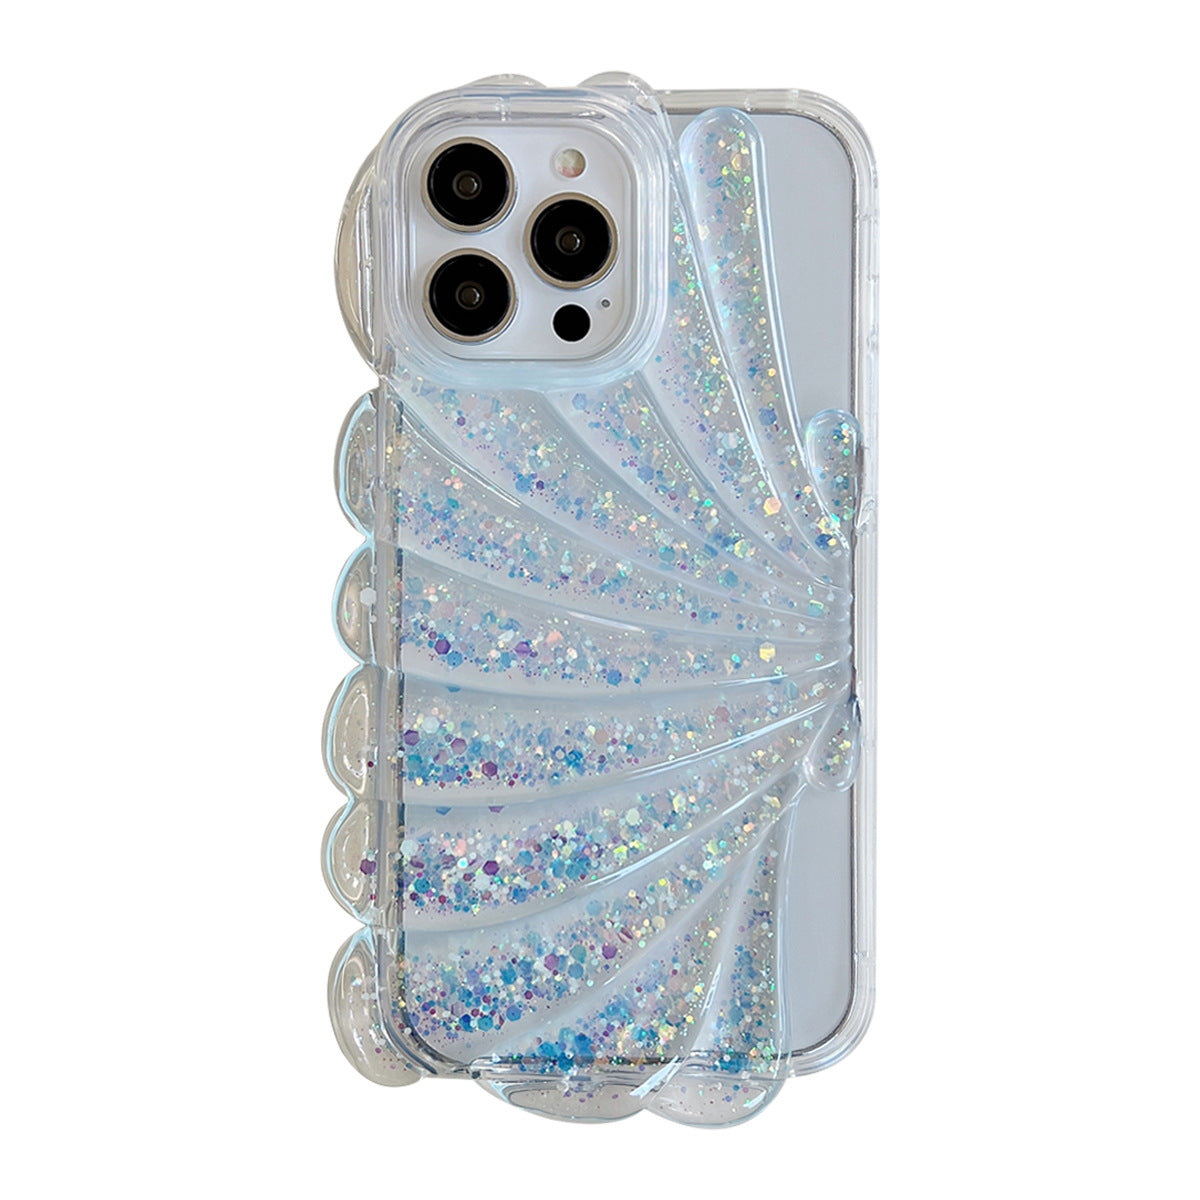 Shiny Bling Bling Shell iPhone Case for iPhone 11-15 Pro Max, Transparent Glitter Shell Phone Case for Women Girls, Coquette Aesthetics, Soft Feminine Style, Made of TPU, Available in 5 Colors